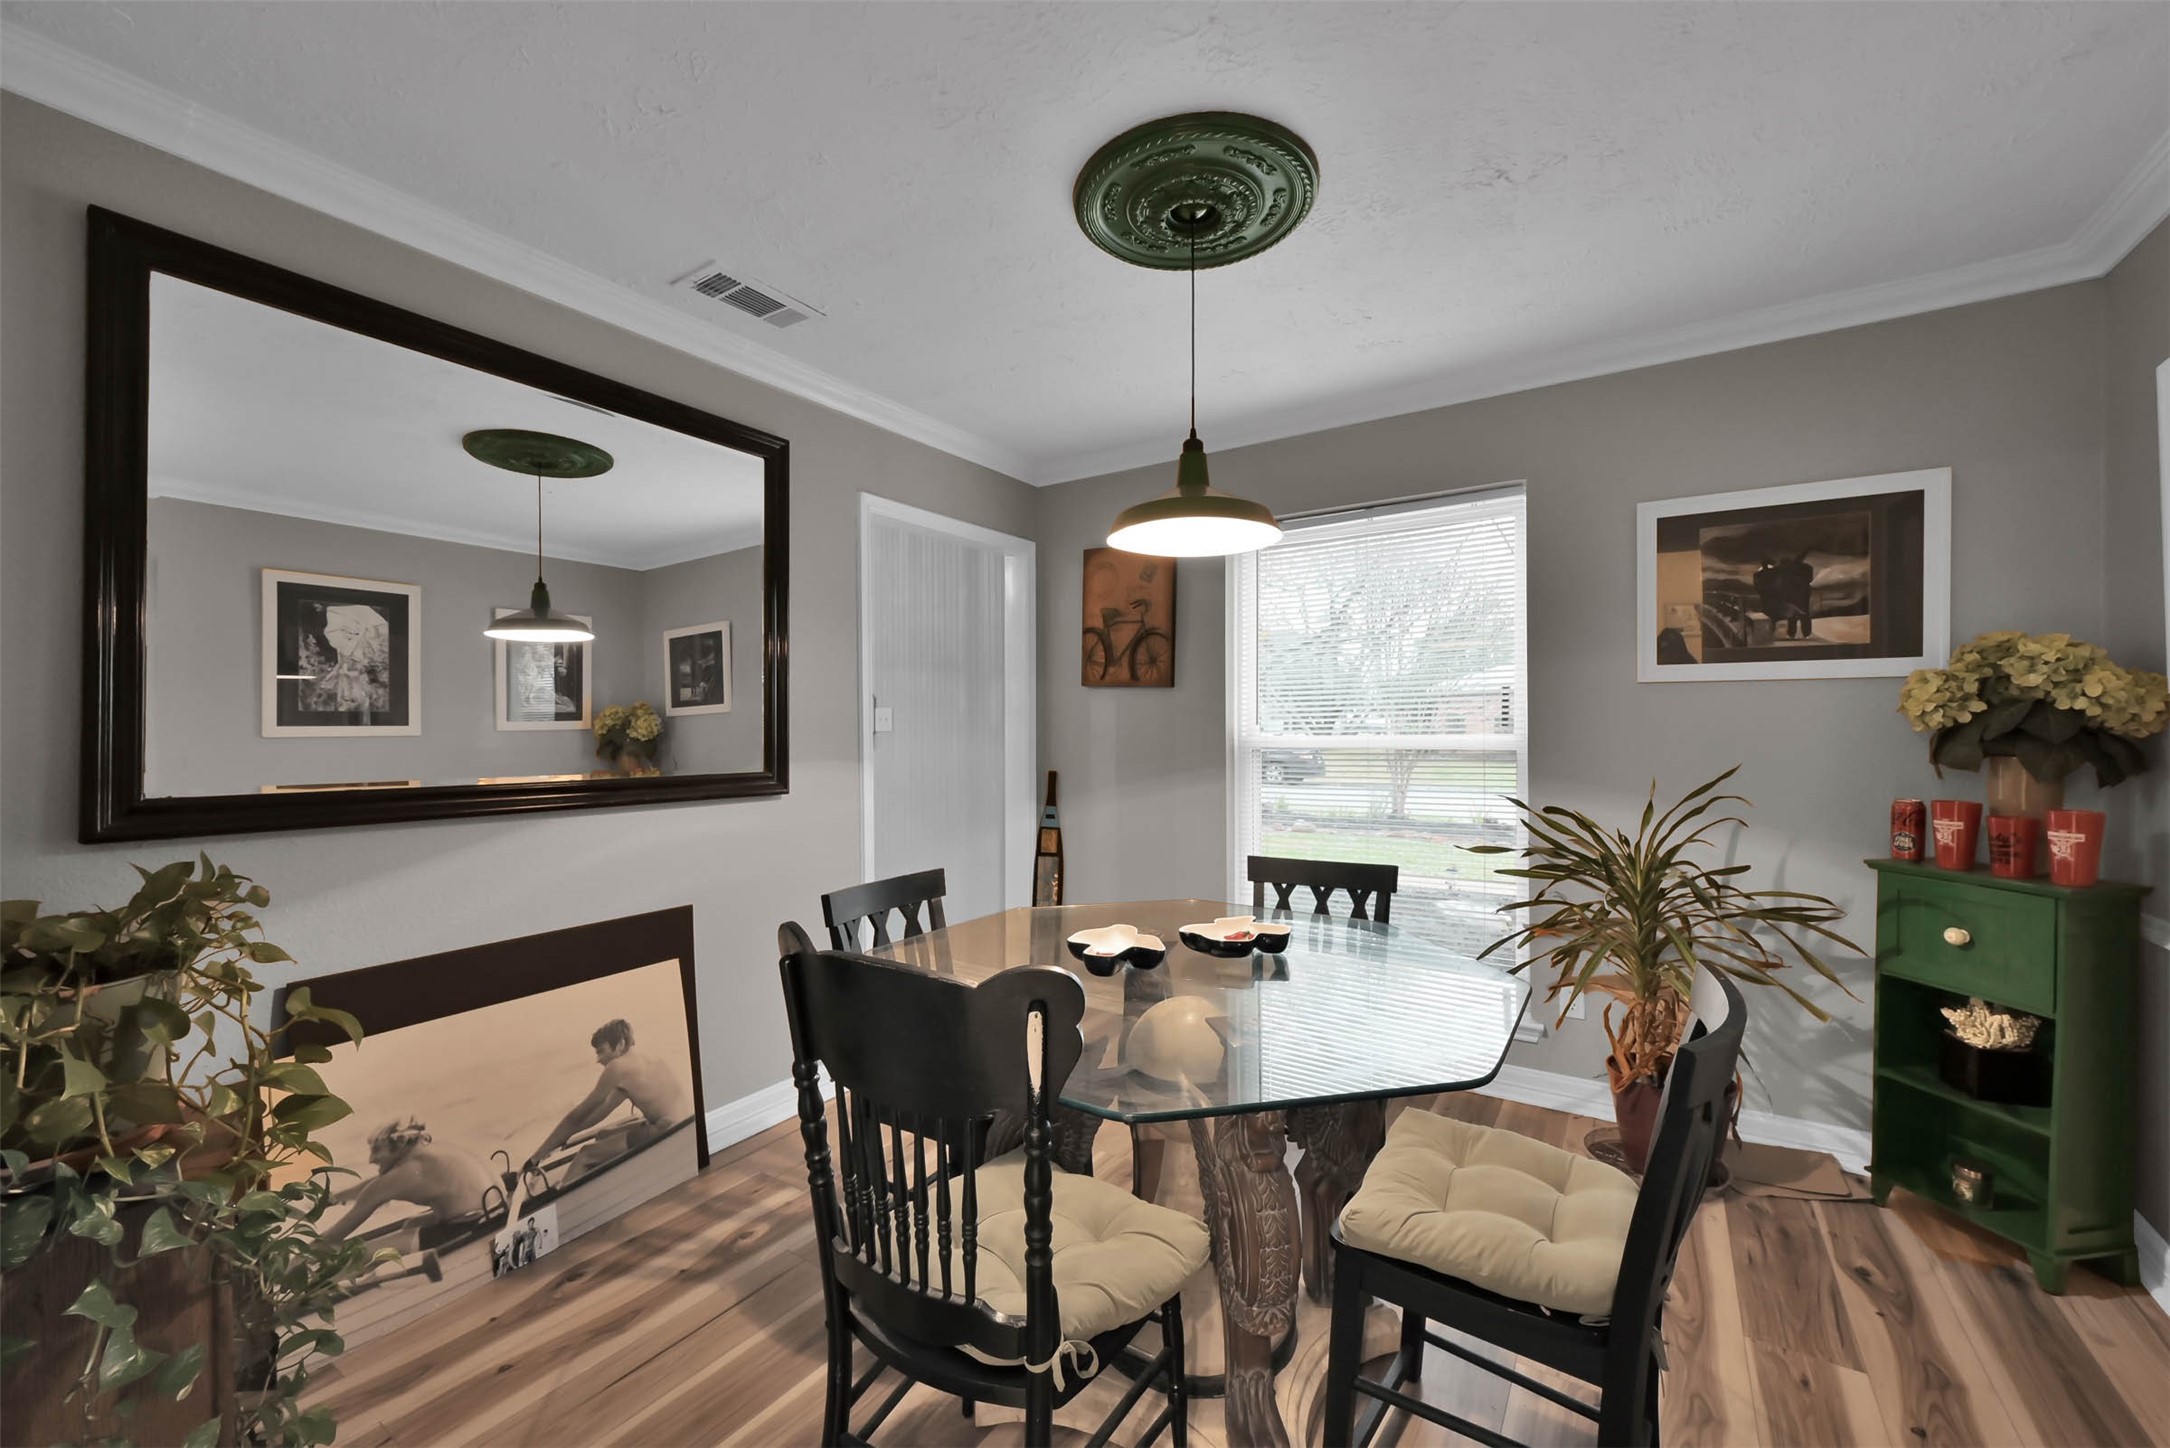 The dining room is convenient to the kitchen and the interior has been painted a neutral greige.